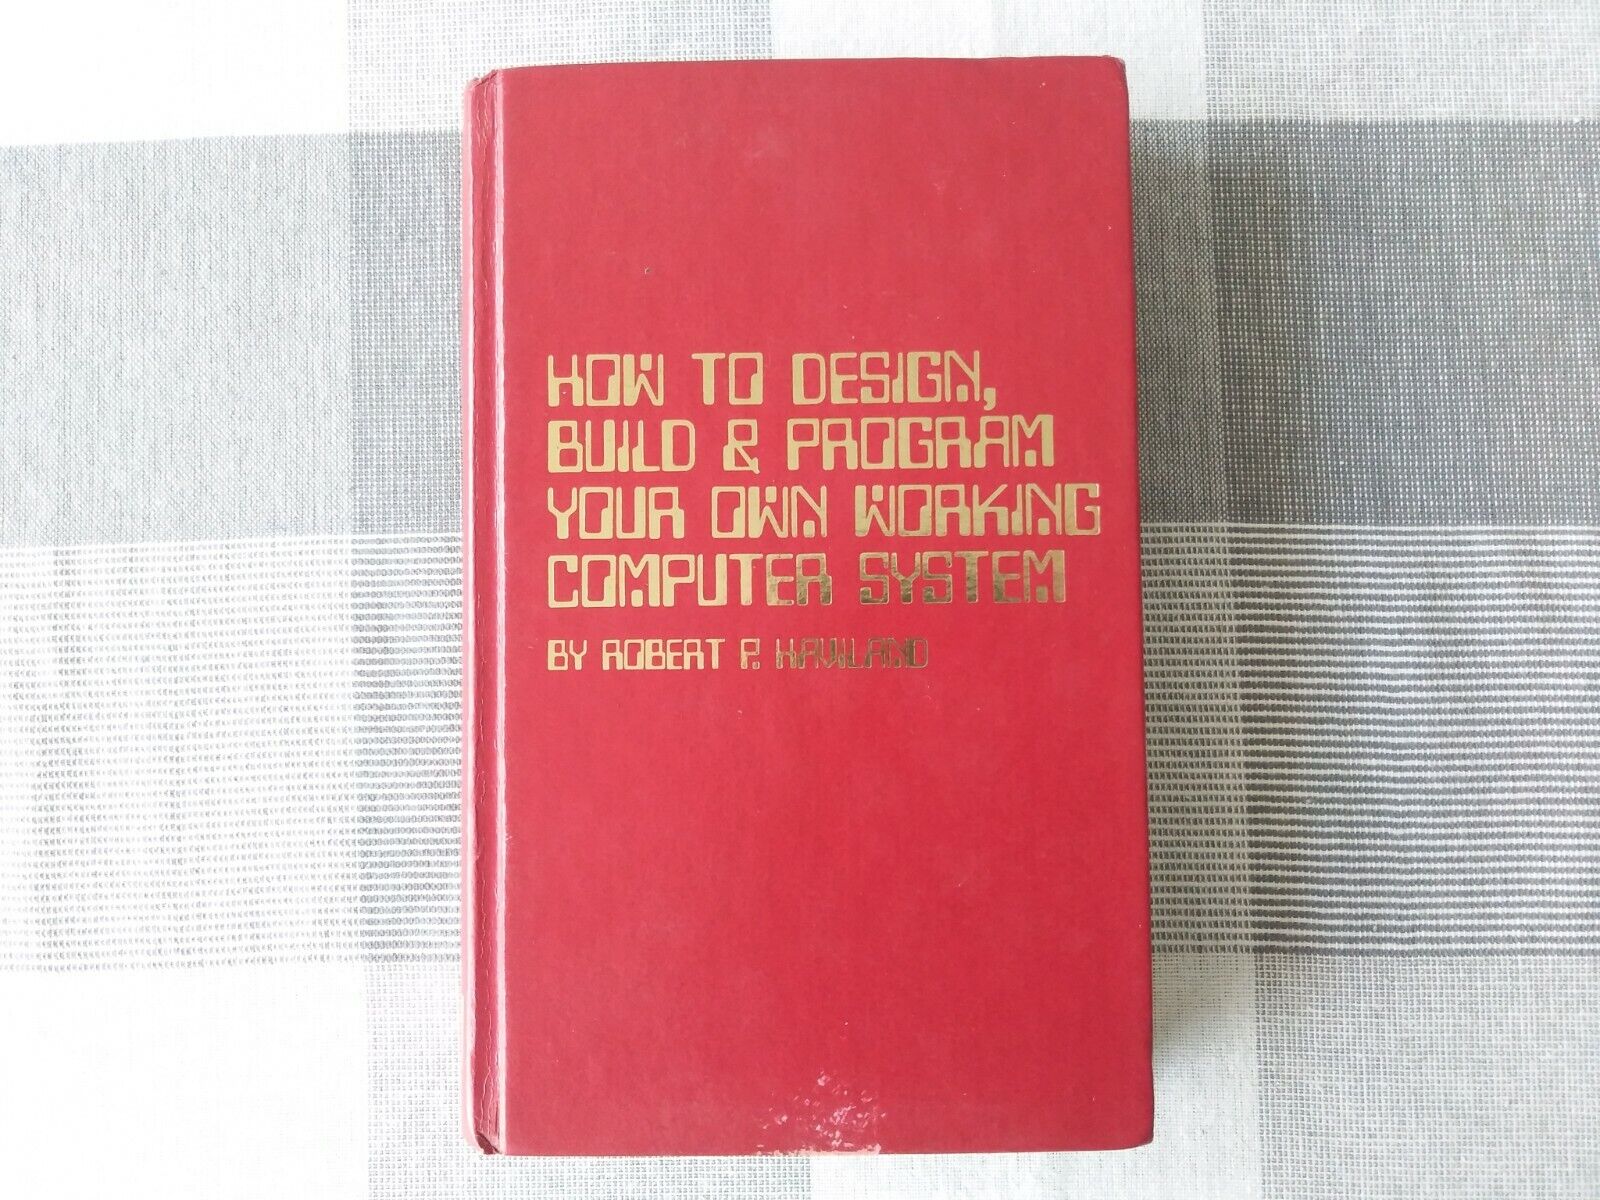 1979 How to design, build & program your own working computer system